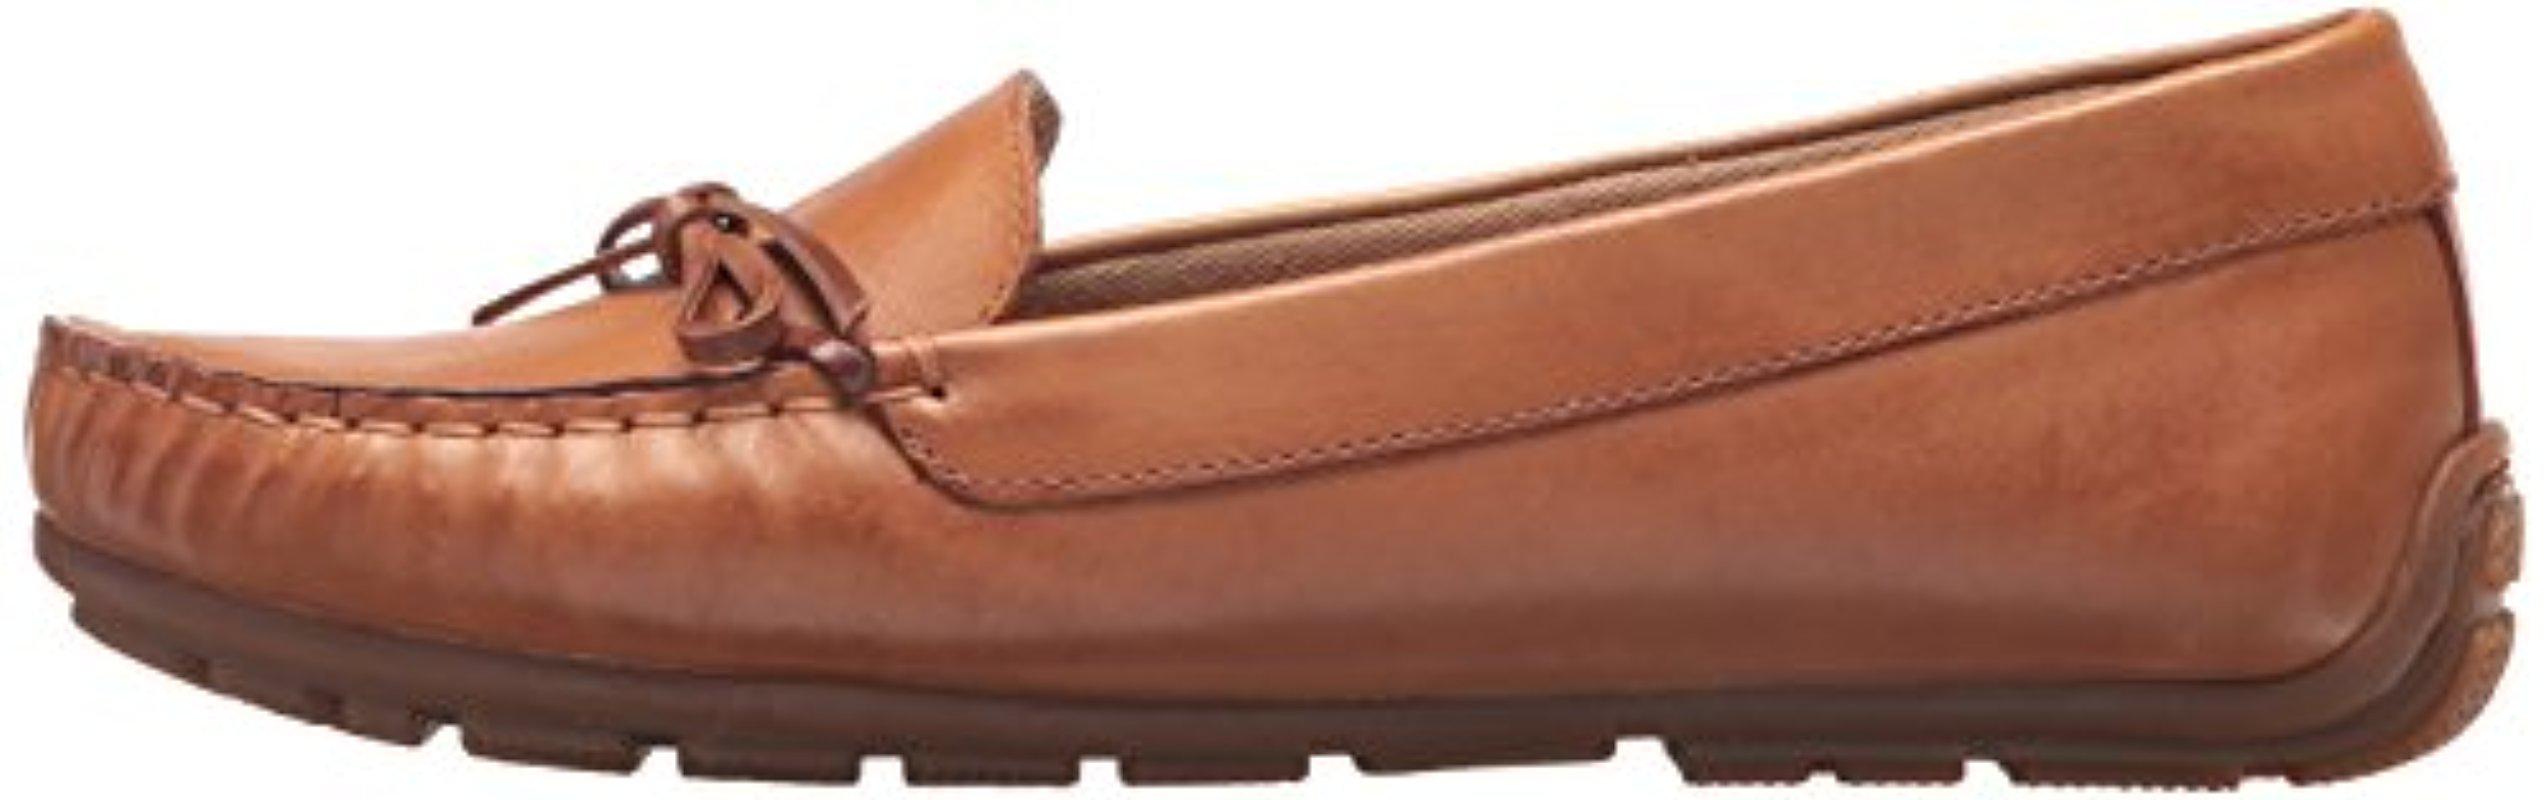 Clarks Womens Dameo Swing Driving Style 